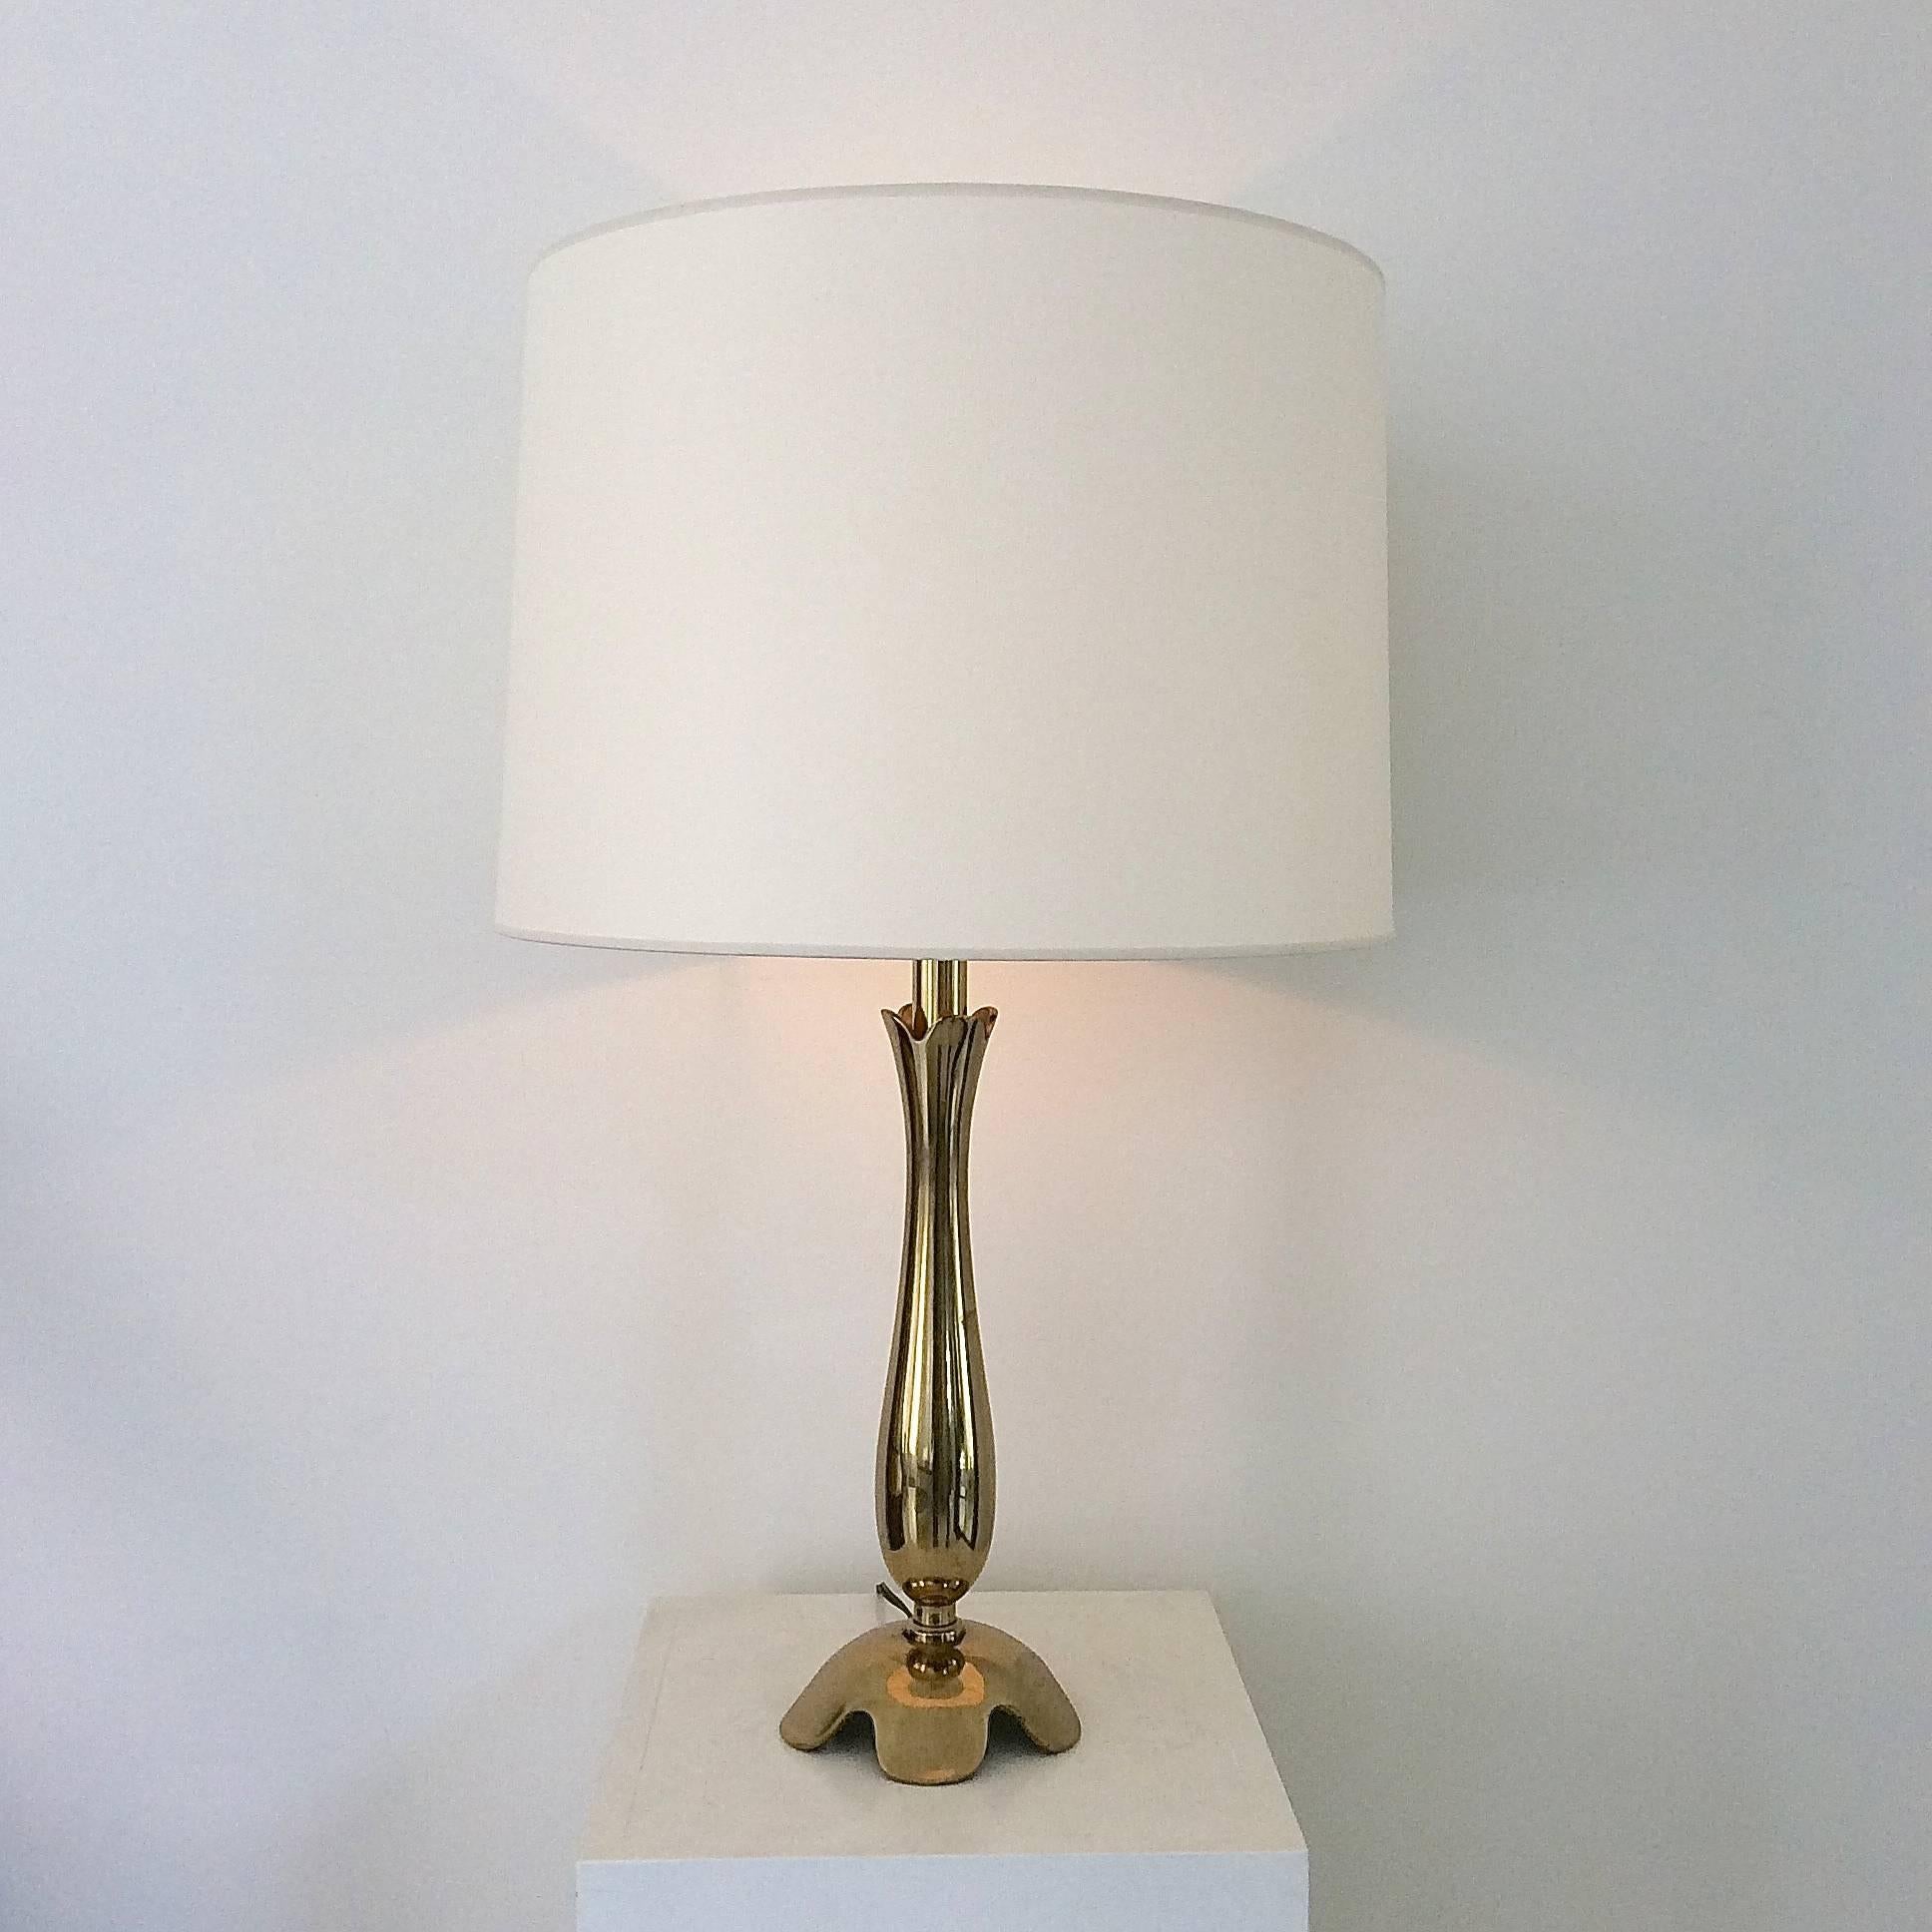 Elegant Raoul Scarpa table lamp, circa 1950, France.
Brass and new ivory fabric shade.
Measures: H 65 cm, W 40 cm, D 40 cm.
Very good condition. Signed Scarpa on the base.
 